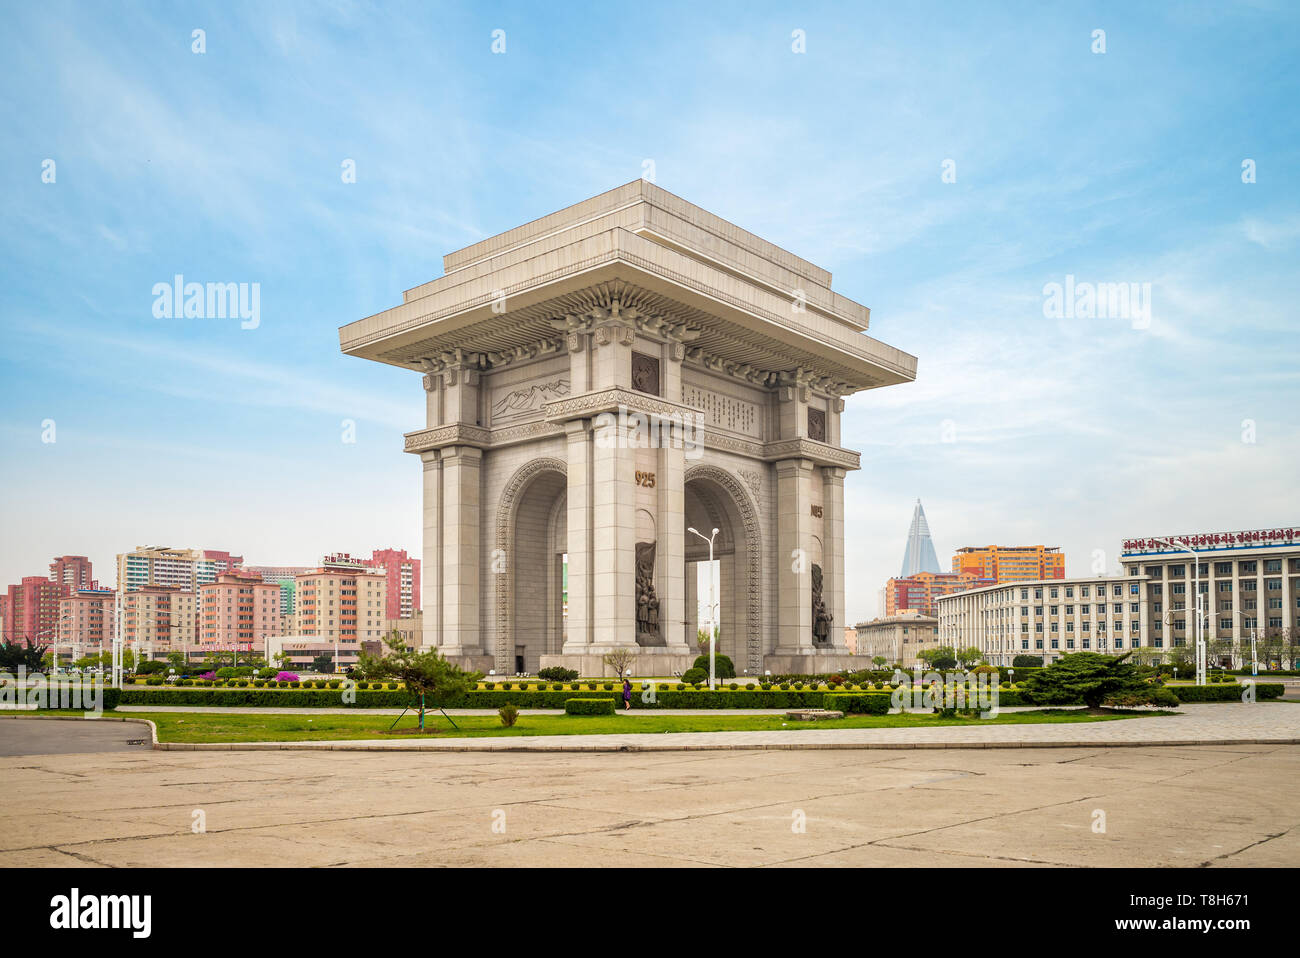 Pyongyang, North Korea - April 29, 2019: Arch of Triumph, a triumphal arch built to commemorate the korean resistance to japan from 1925 to 1945. Stock Photo